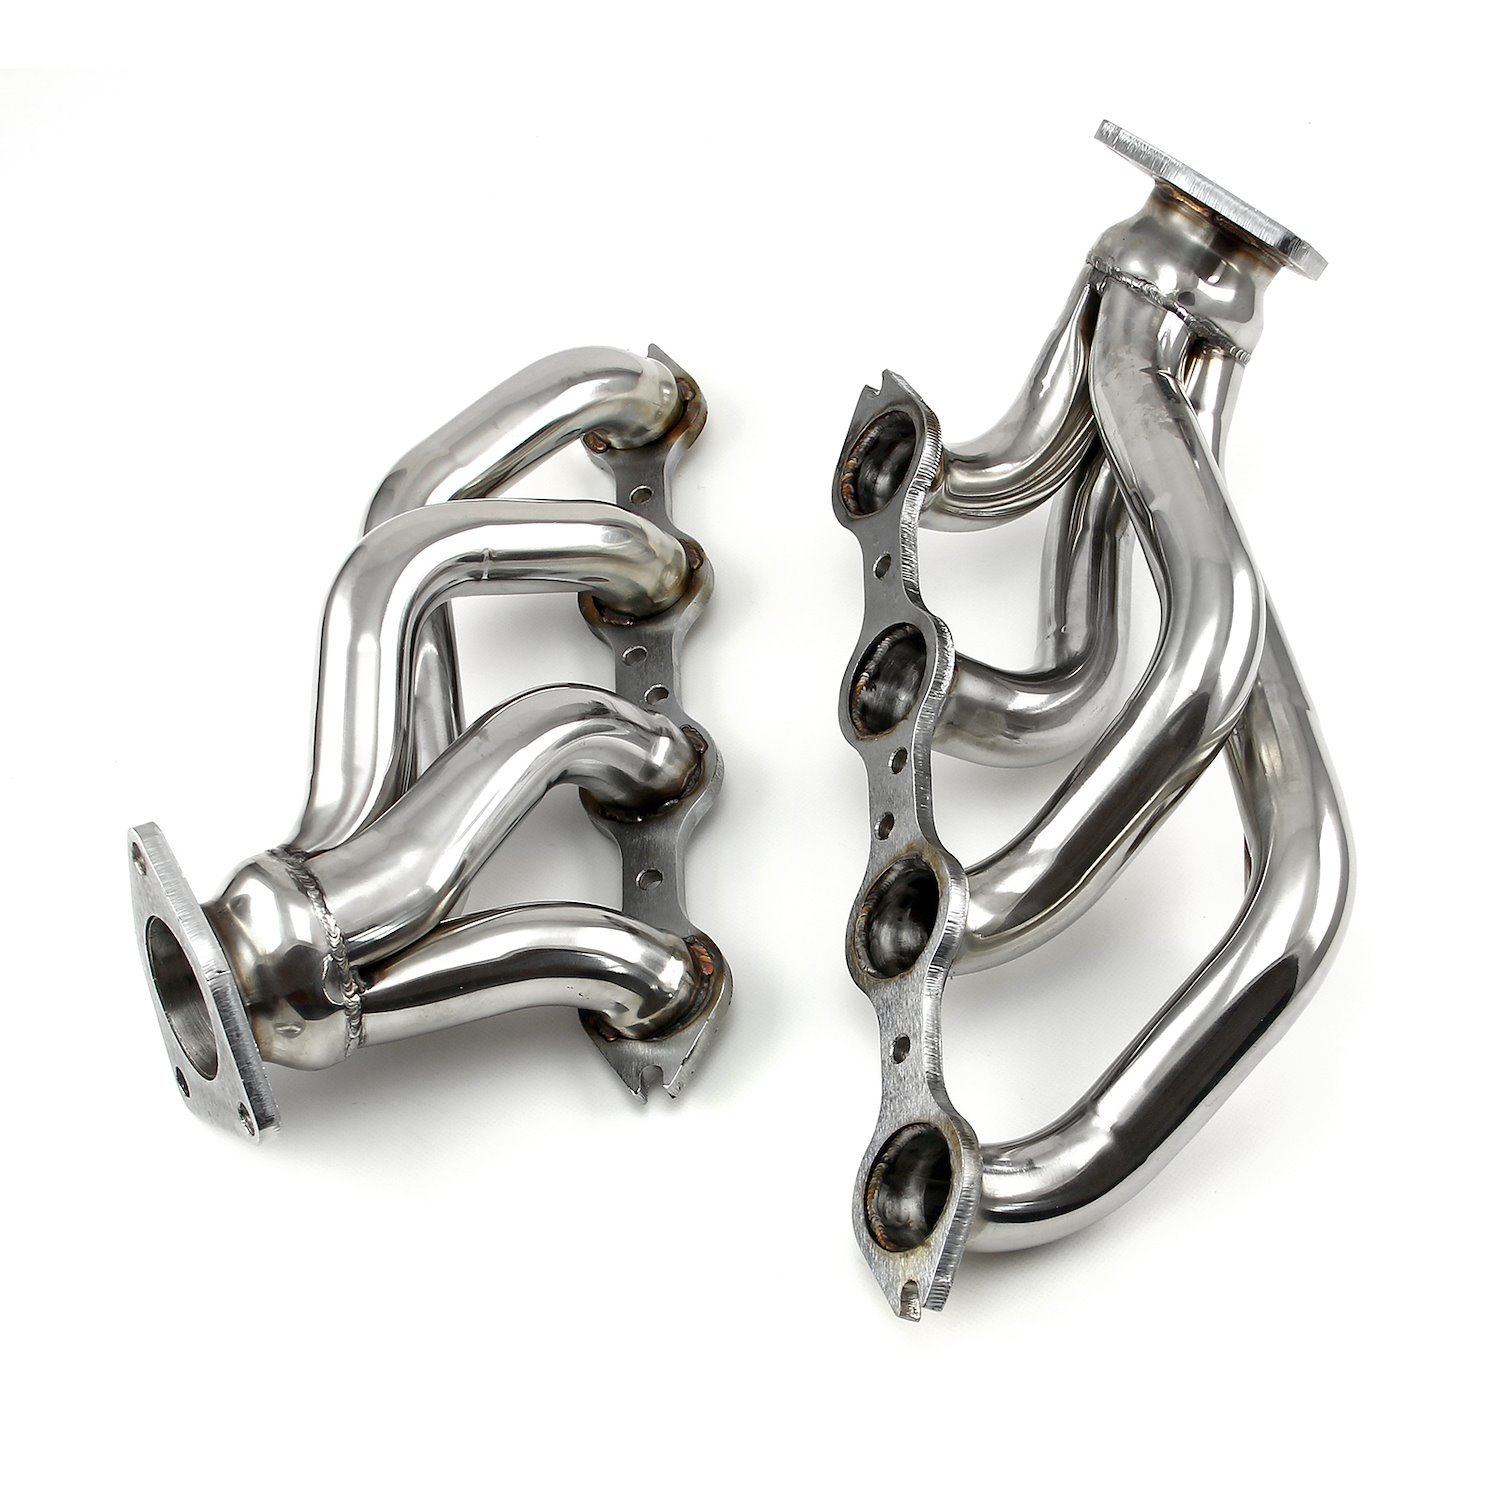 Shorty Exhaust Headers GM LS1/LS6 for Cadillac, Chevy, Hummer, Pickup Truck